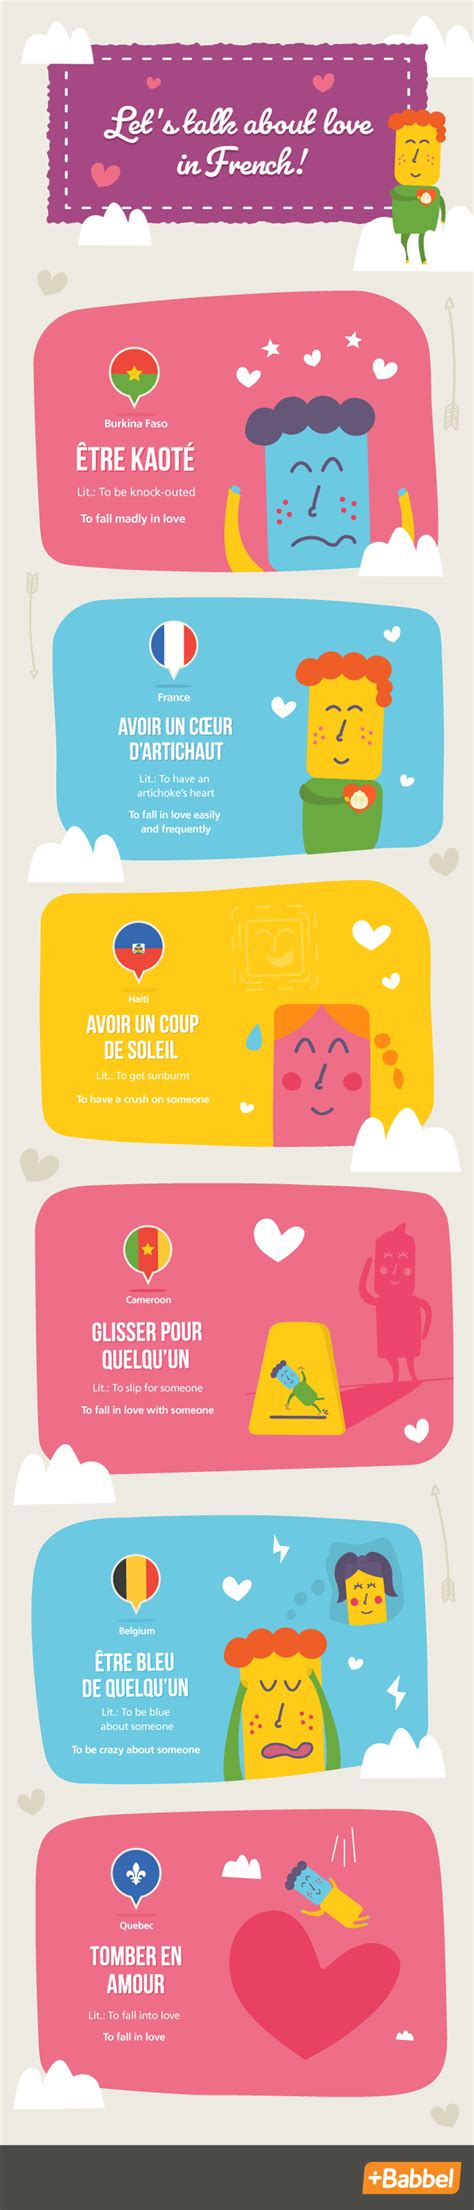 This Valentine’s Day, try expressing your love in French with these romantic phrases from France ...